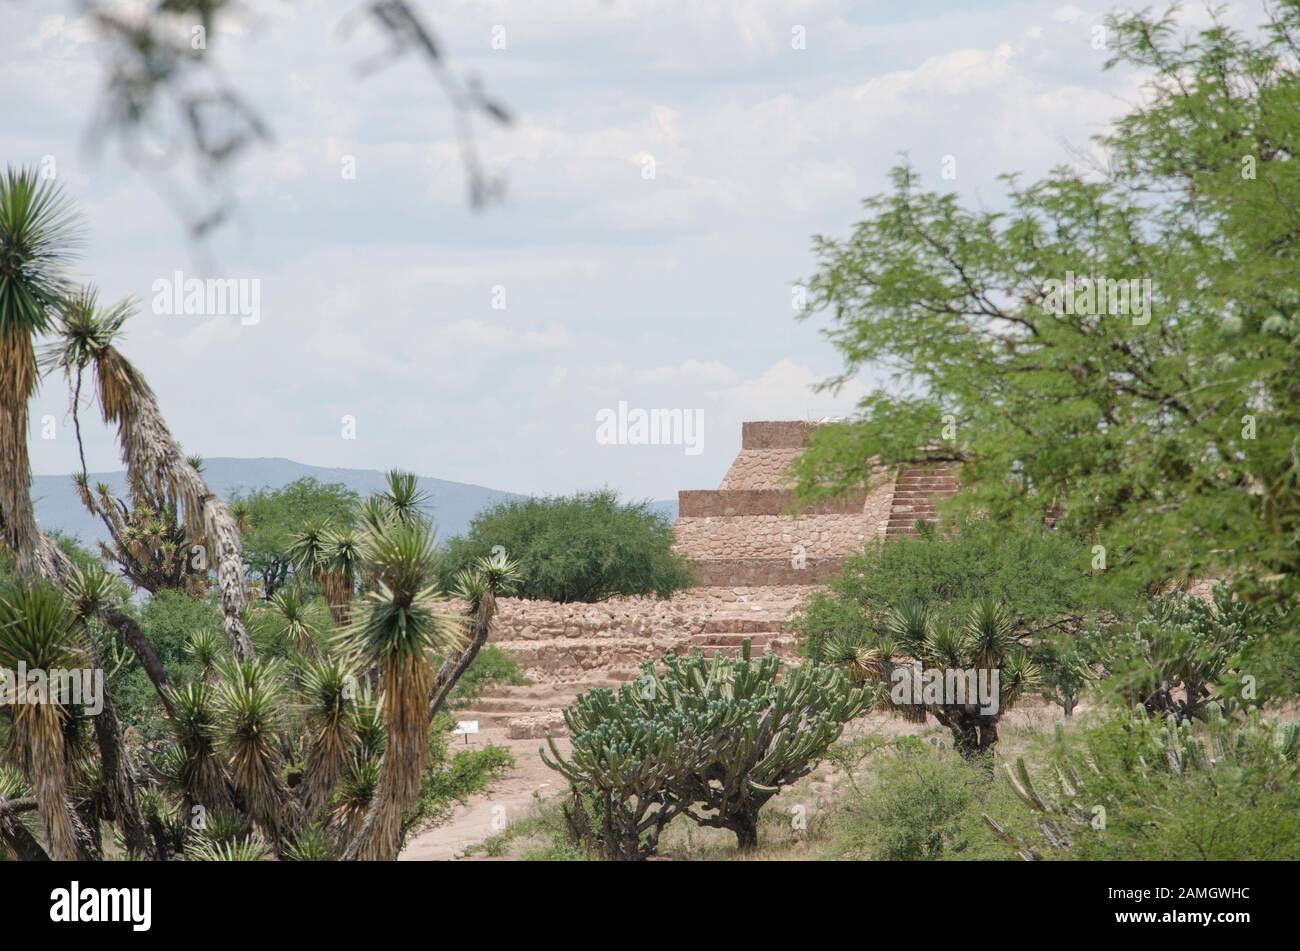 Pahñu, archaeological zone in Hidalgo, Mexico; pyramid that looks out from semi-desert vegetation Stock Photo